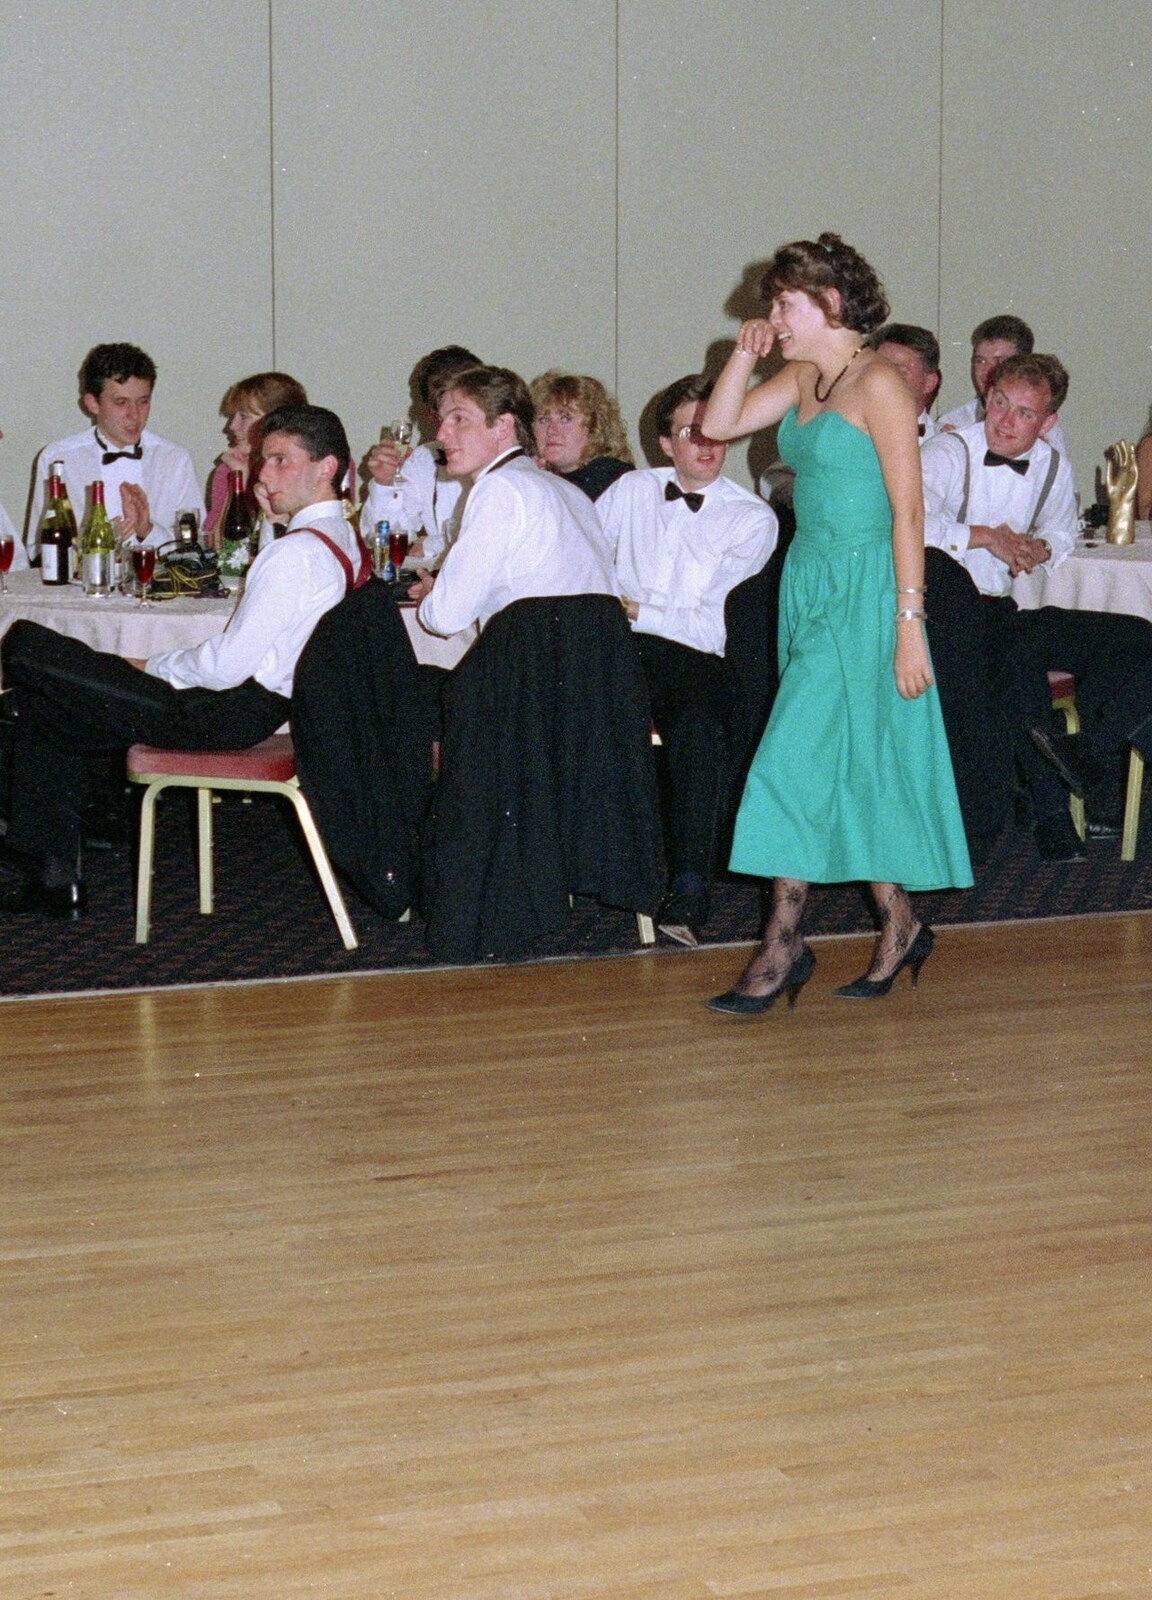 Michelle does the walk of shame from Uni: The BABS End-of-Course Ball, New Continental Hotel, Plymouth - 21st June 1989